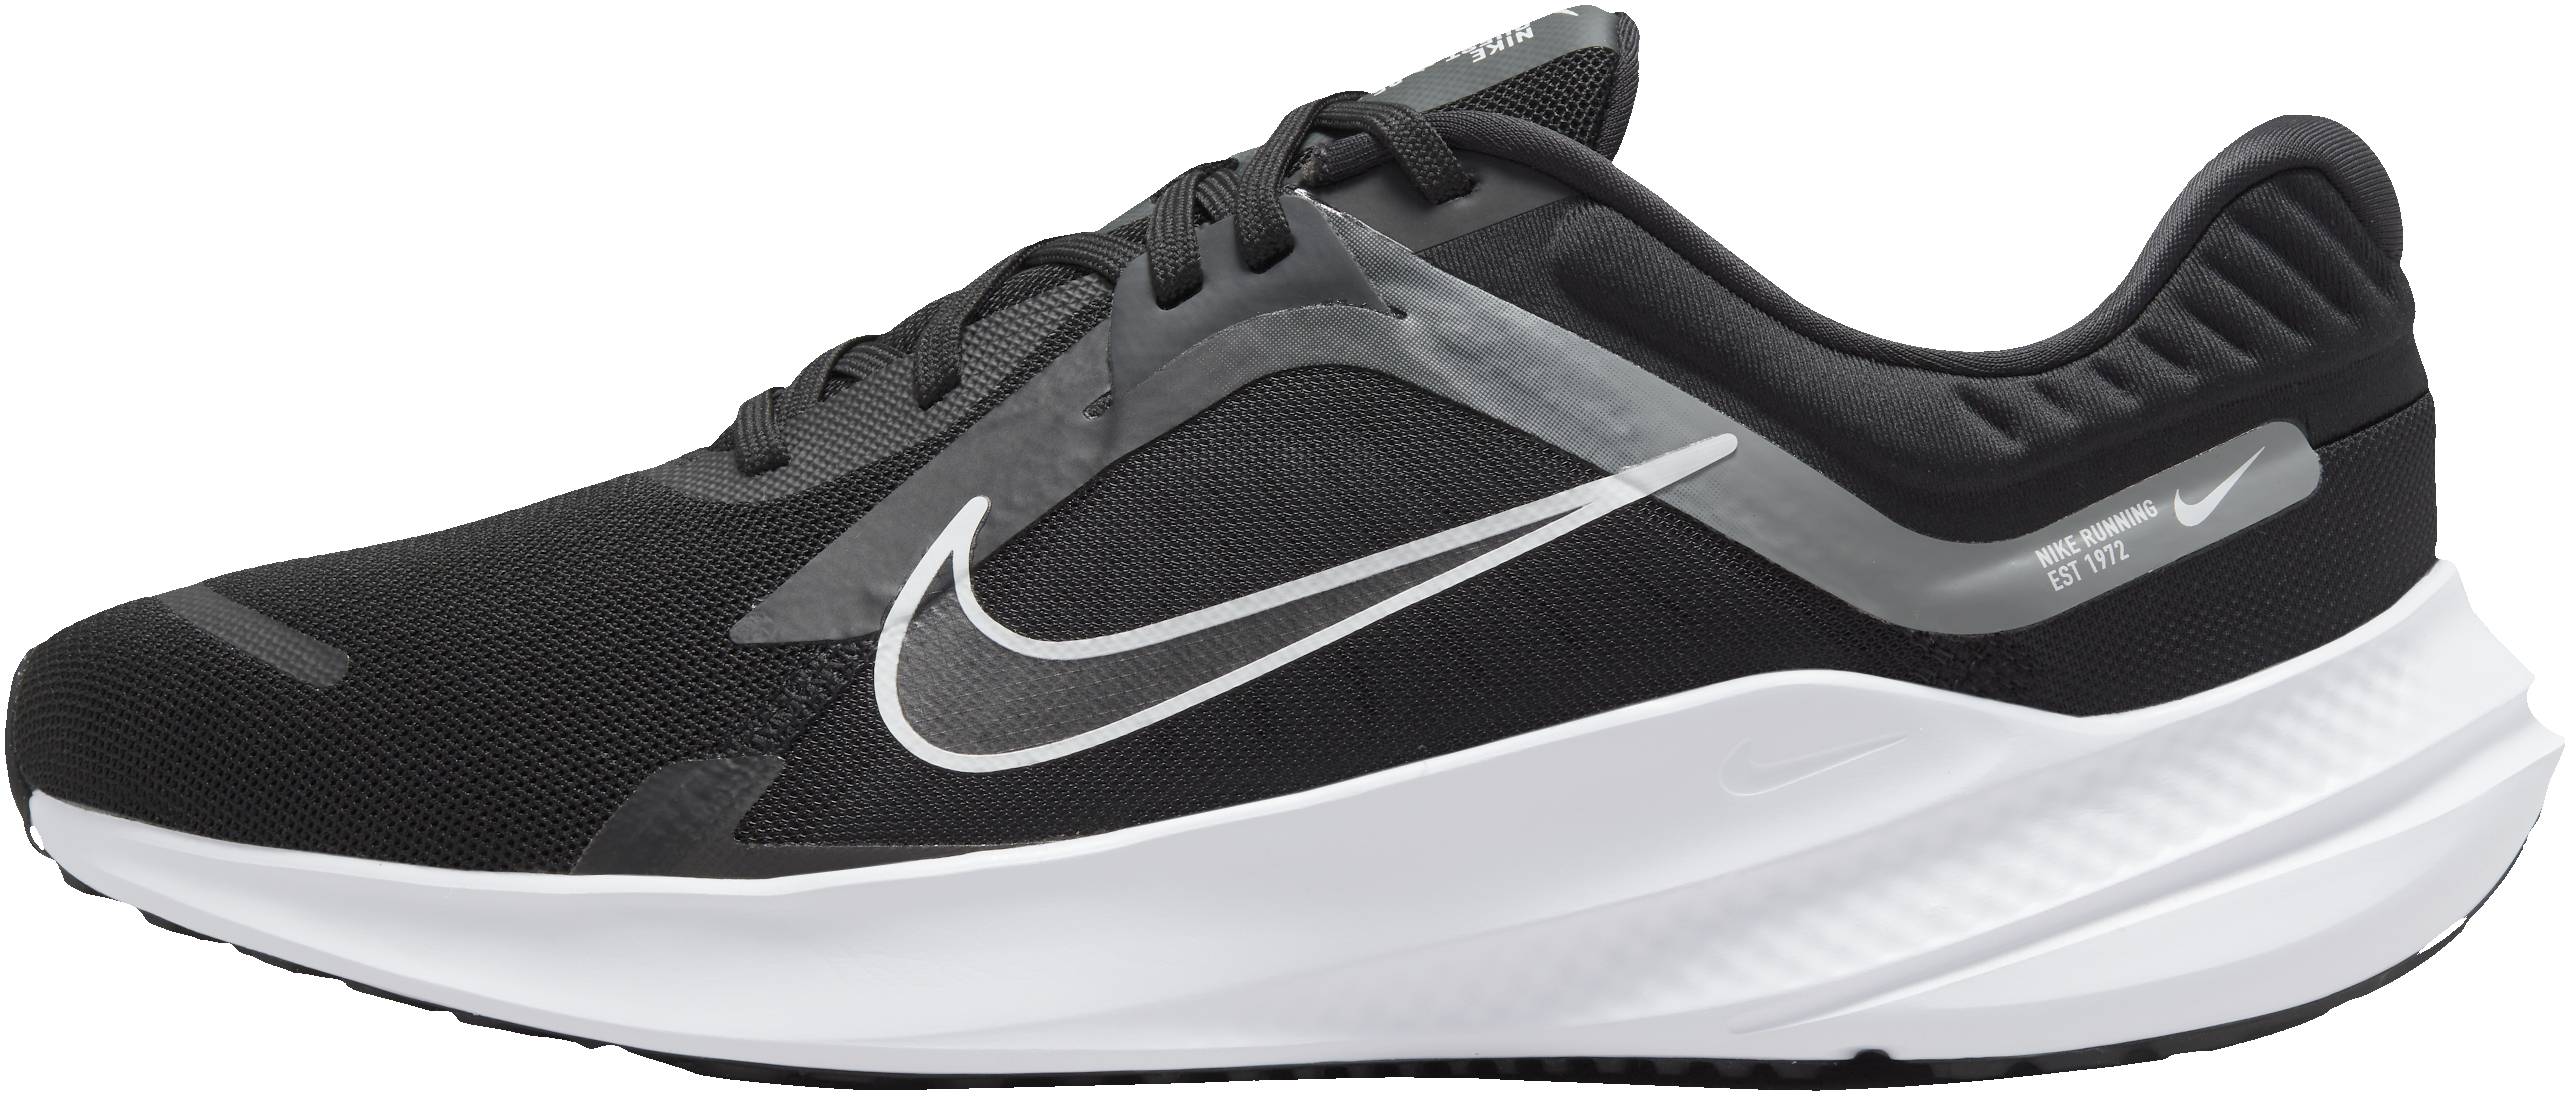 nike quest 2 sports direct